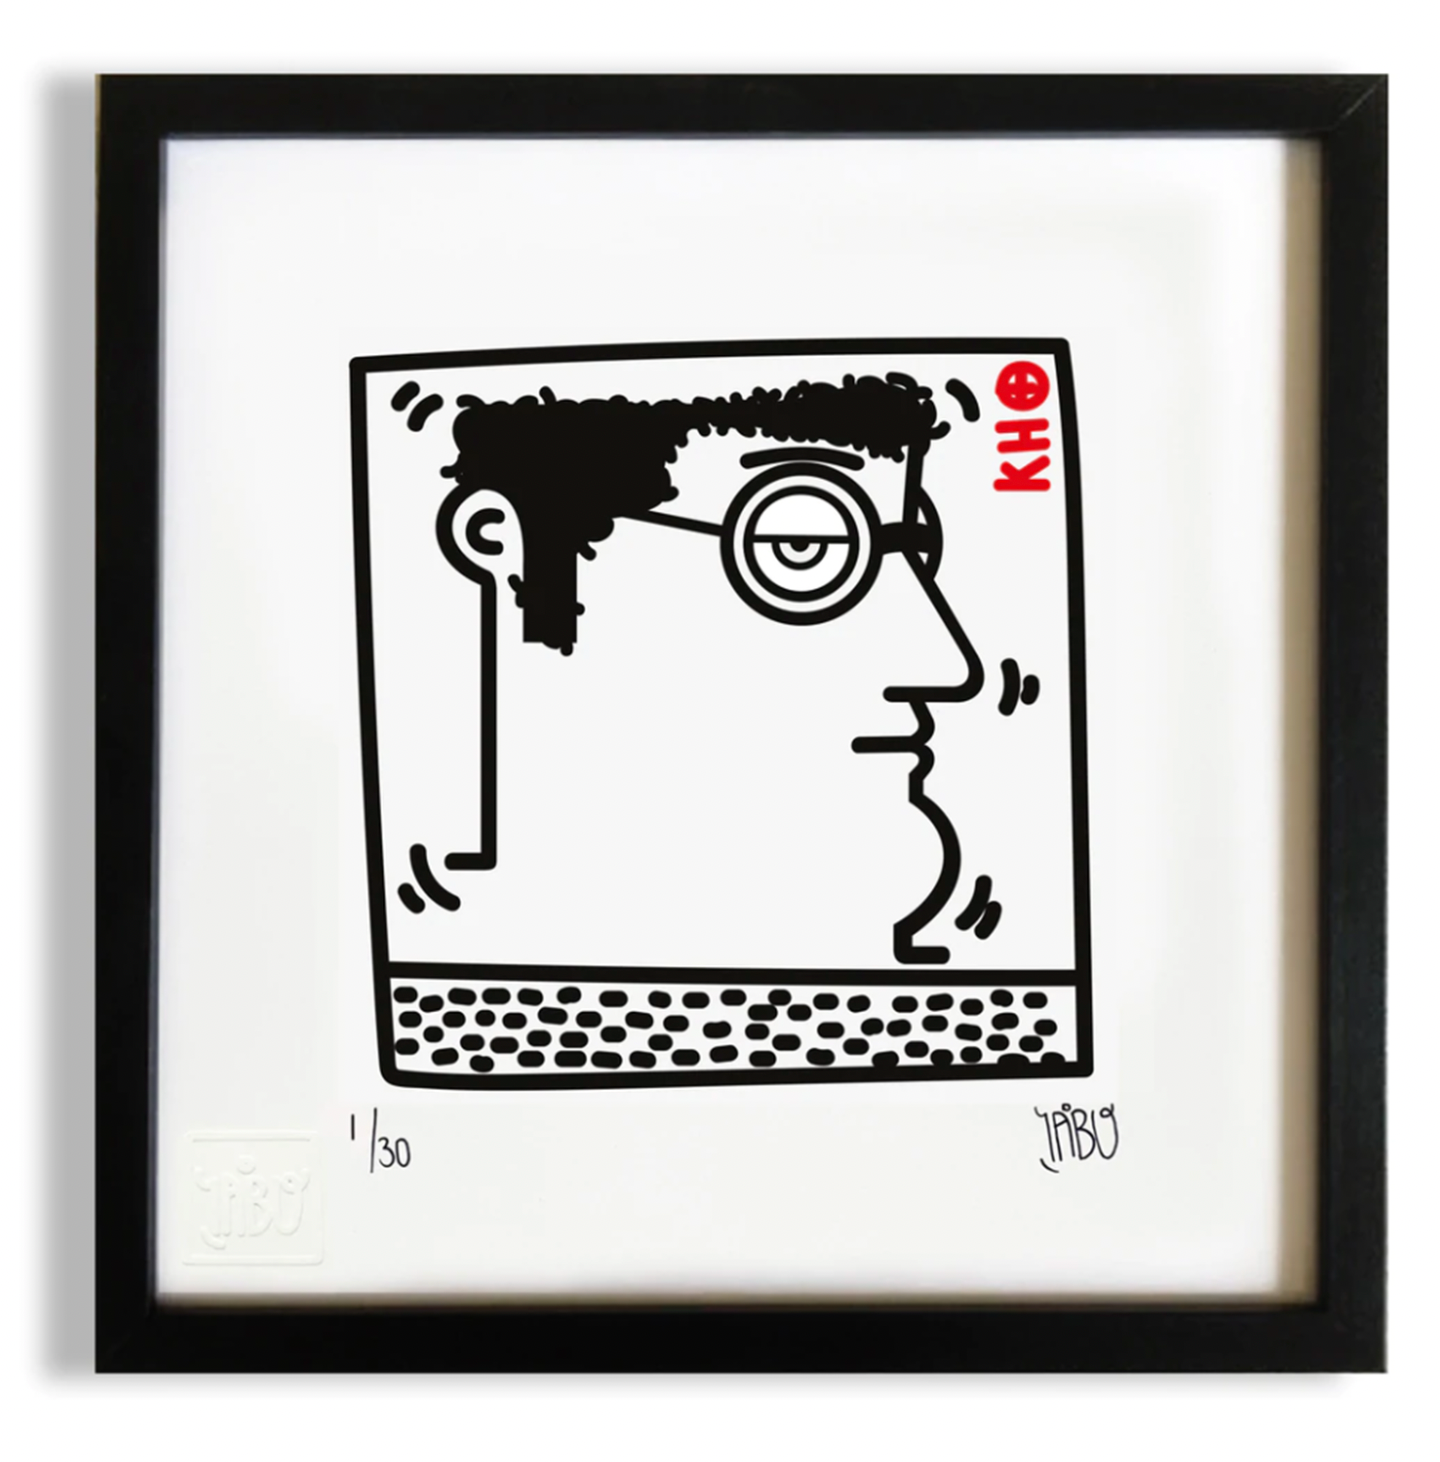 Untitled (K. Haring - Portrait) Black and white version